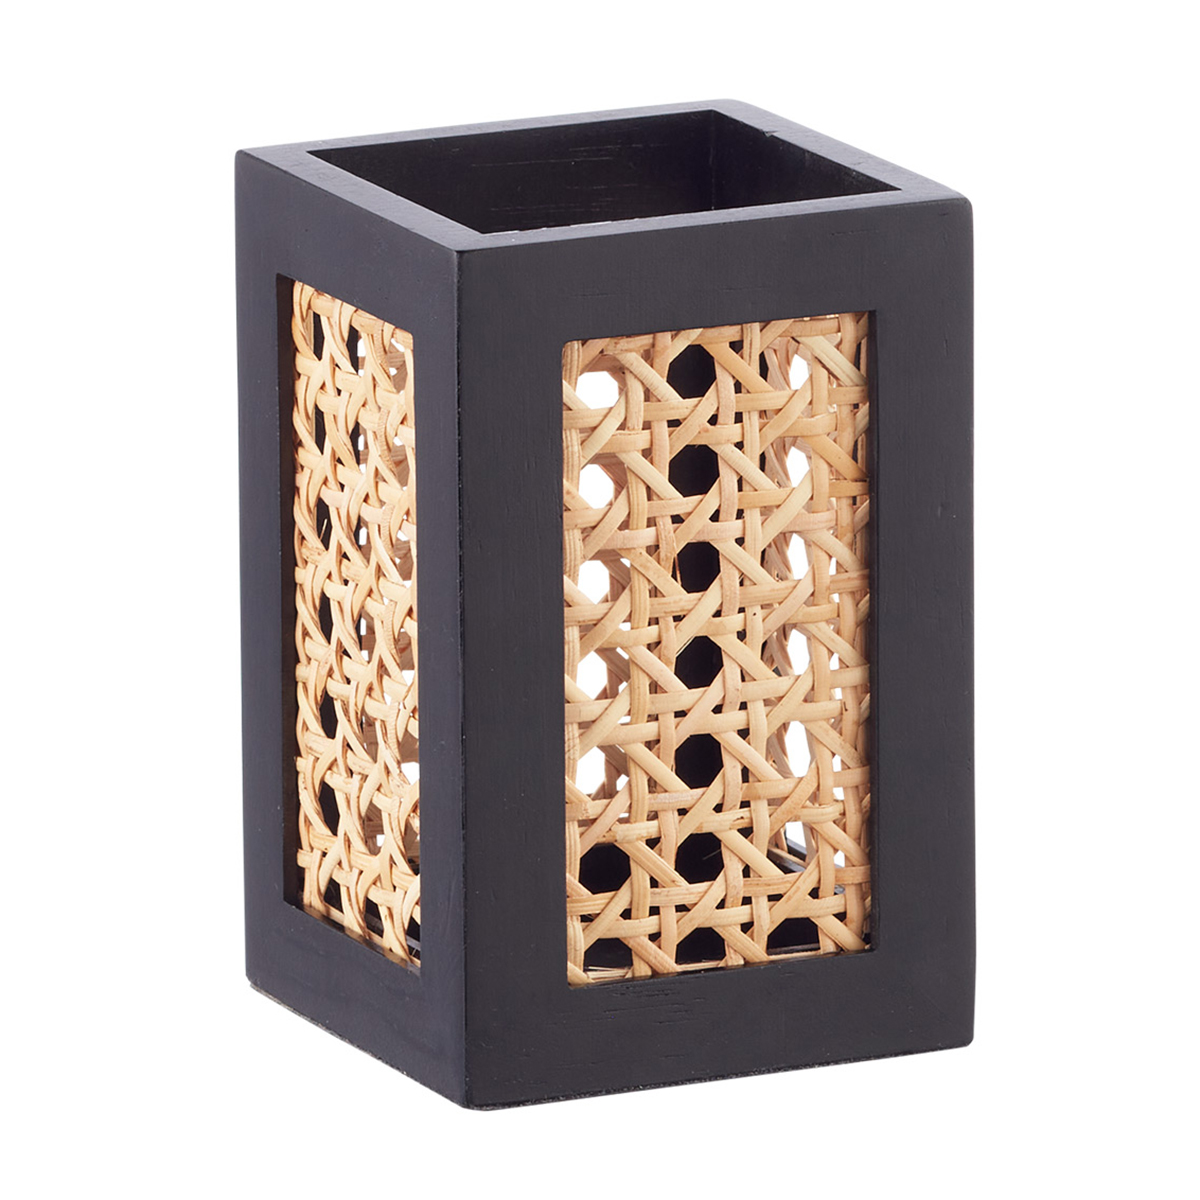 The Container Store Artisan Rattan Cane Pencil Cup Black